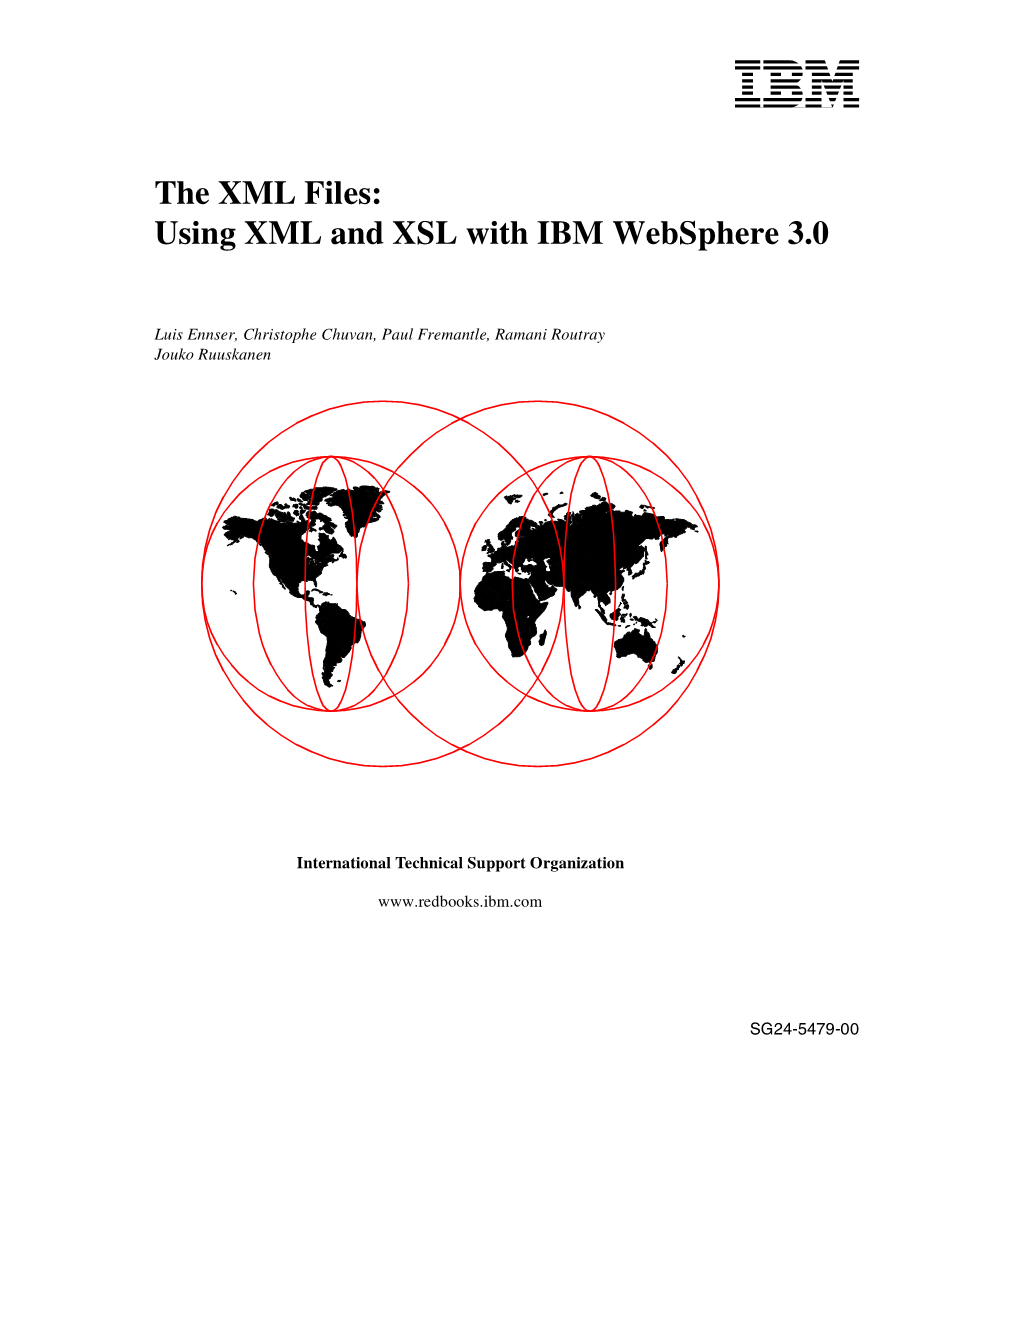 Using XML and XSL with IBM Websphere 3.0